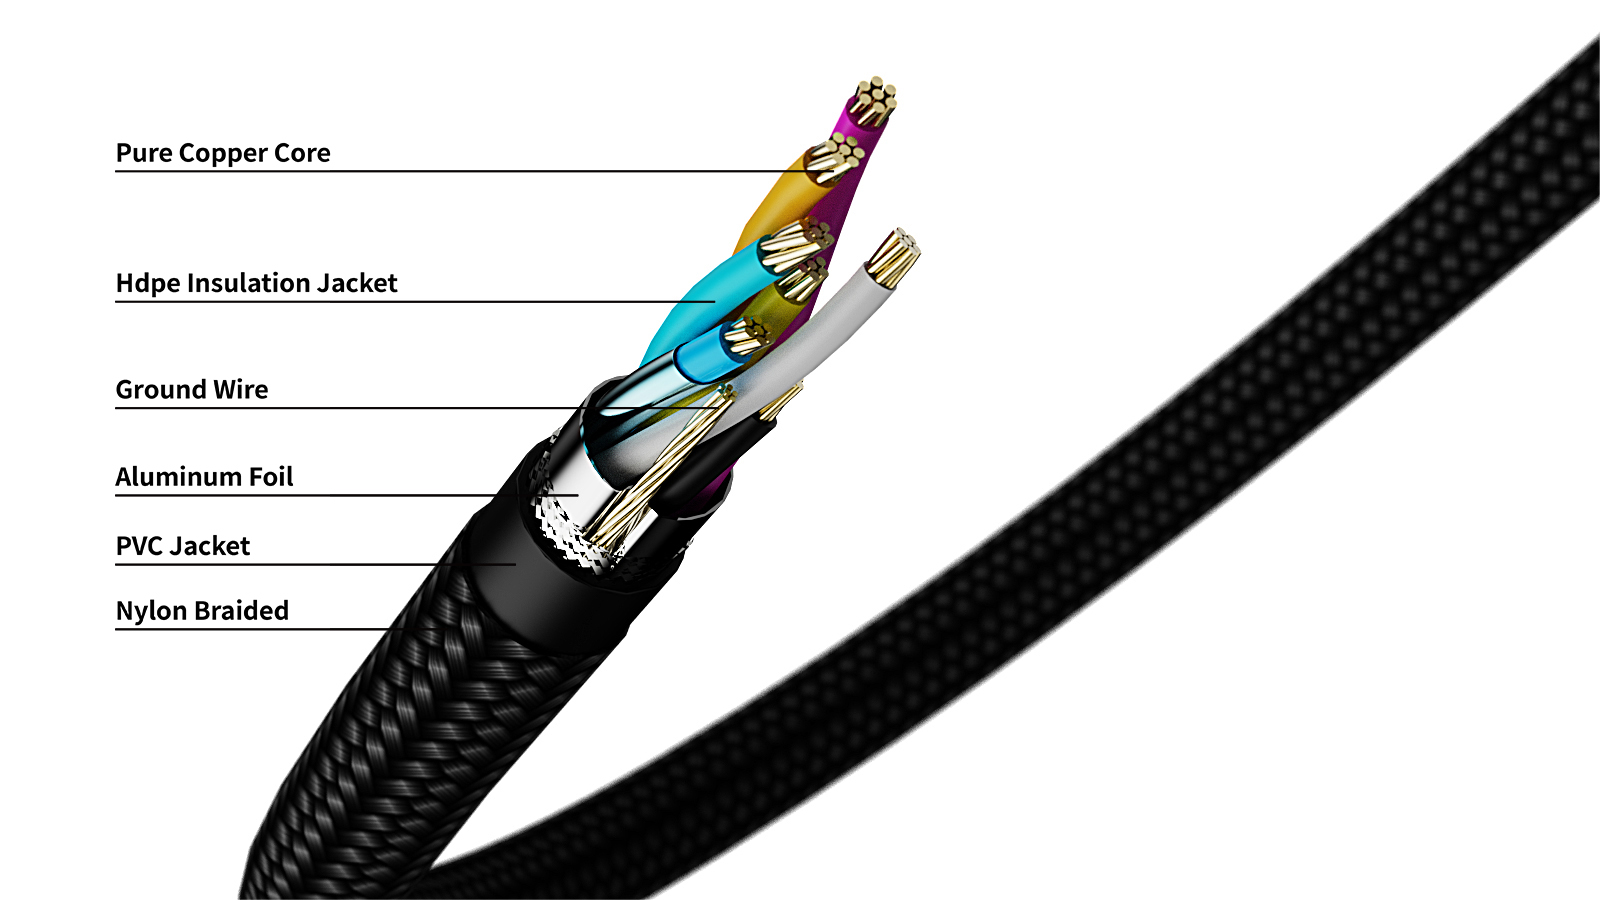 A large marketing image providing additional information about the product Volans Ultra 8K DP to DP Cable V1.4 - 1m - Additional alt info not provided